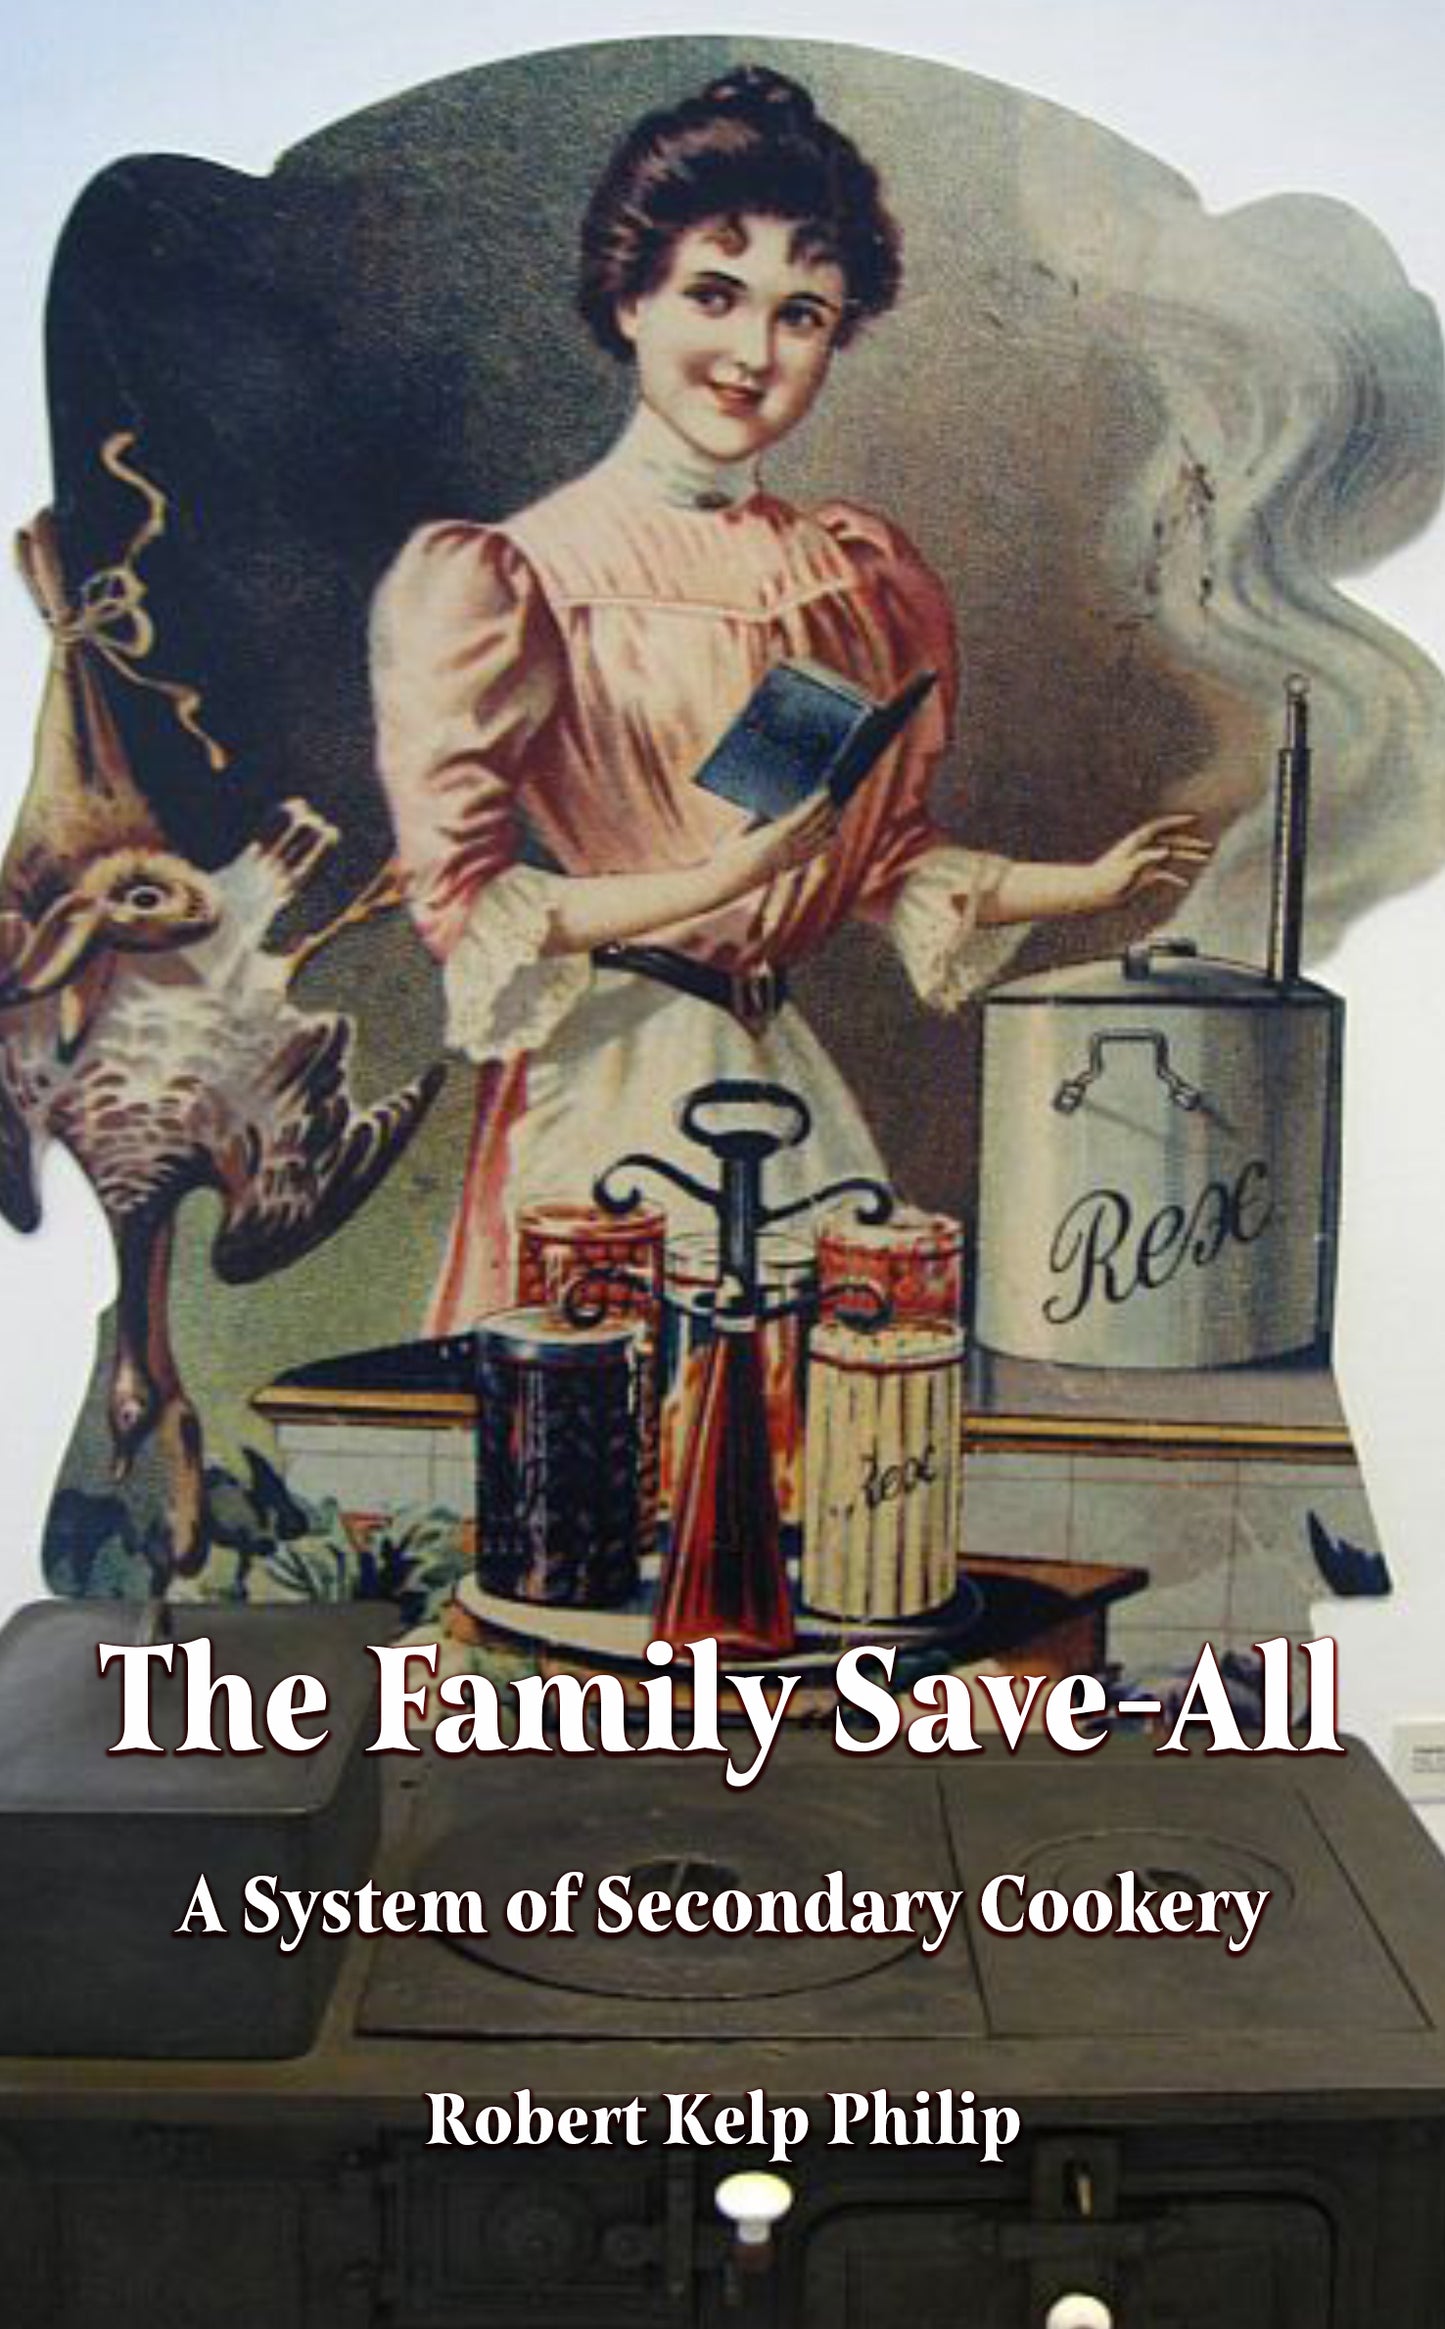 The Family Save-All